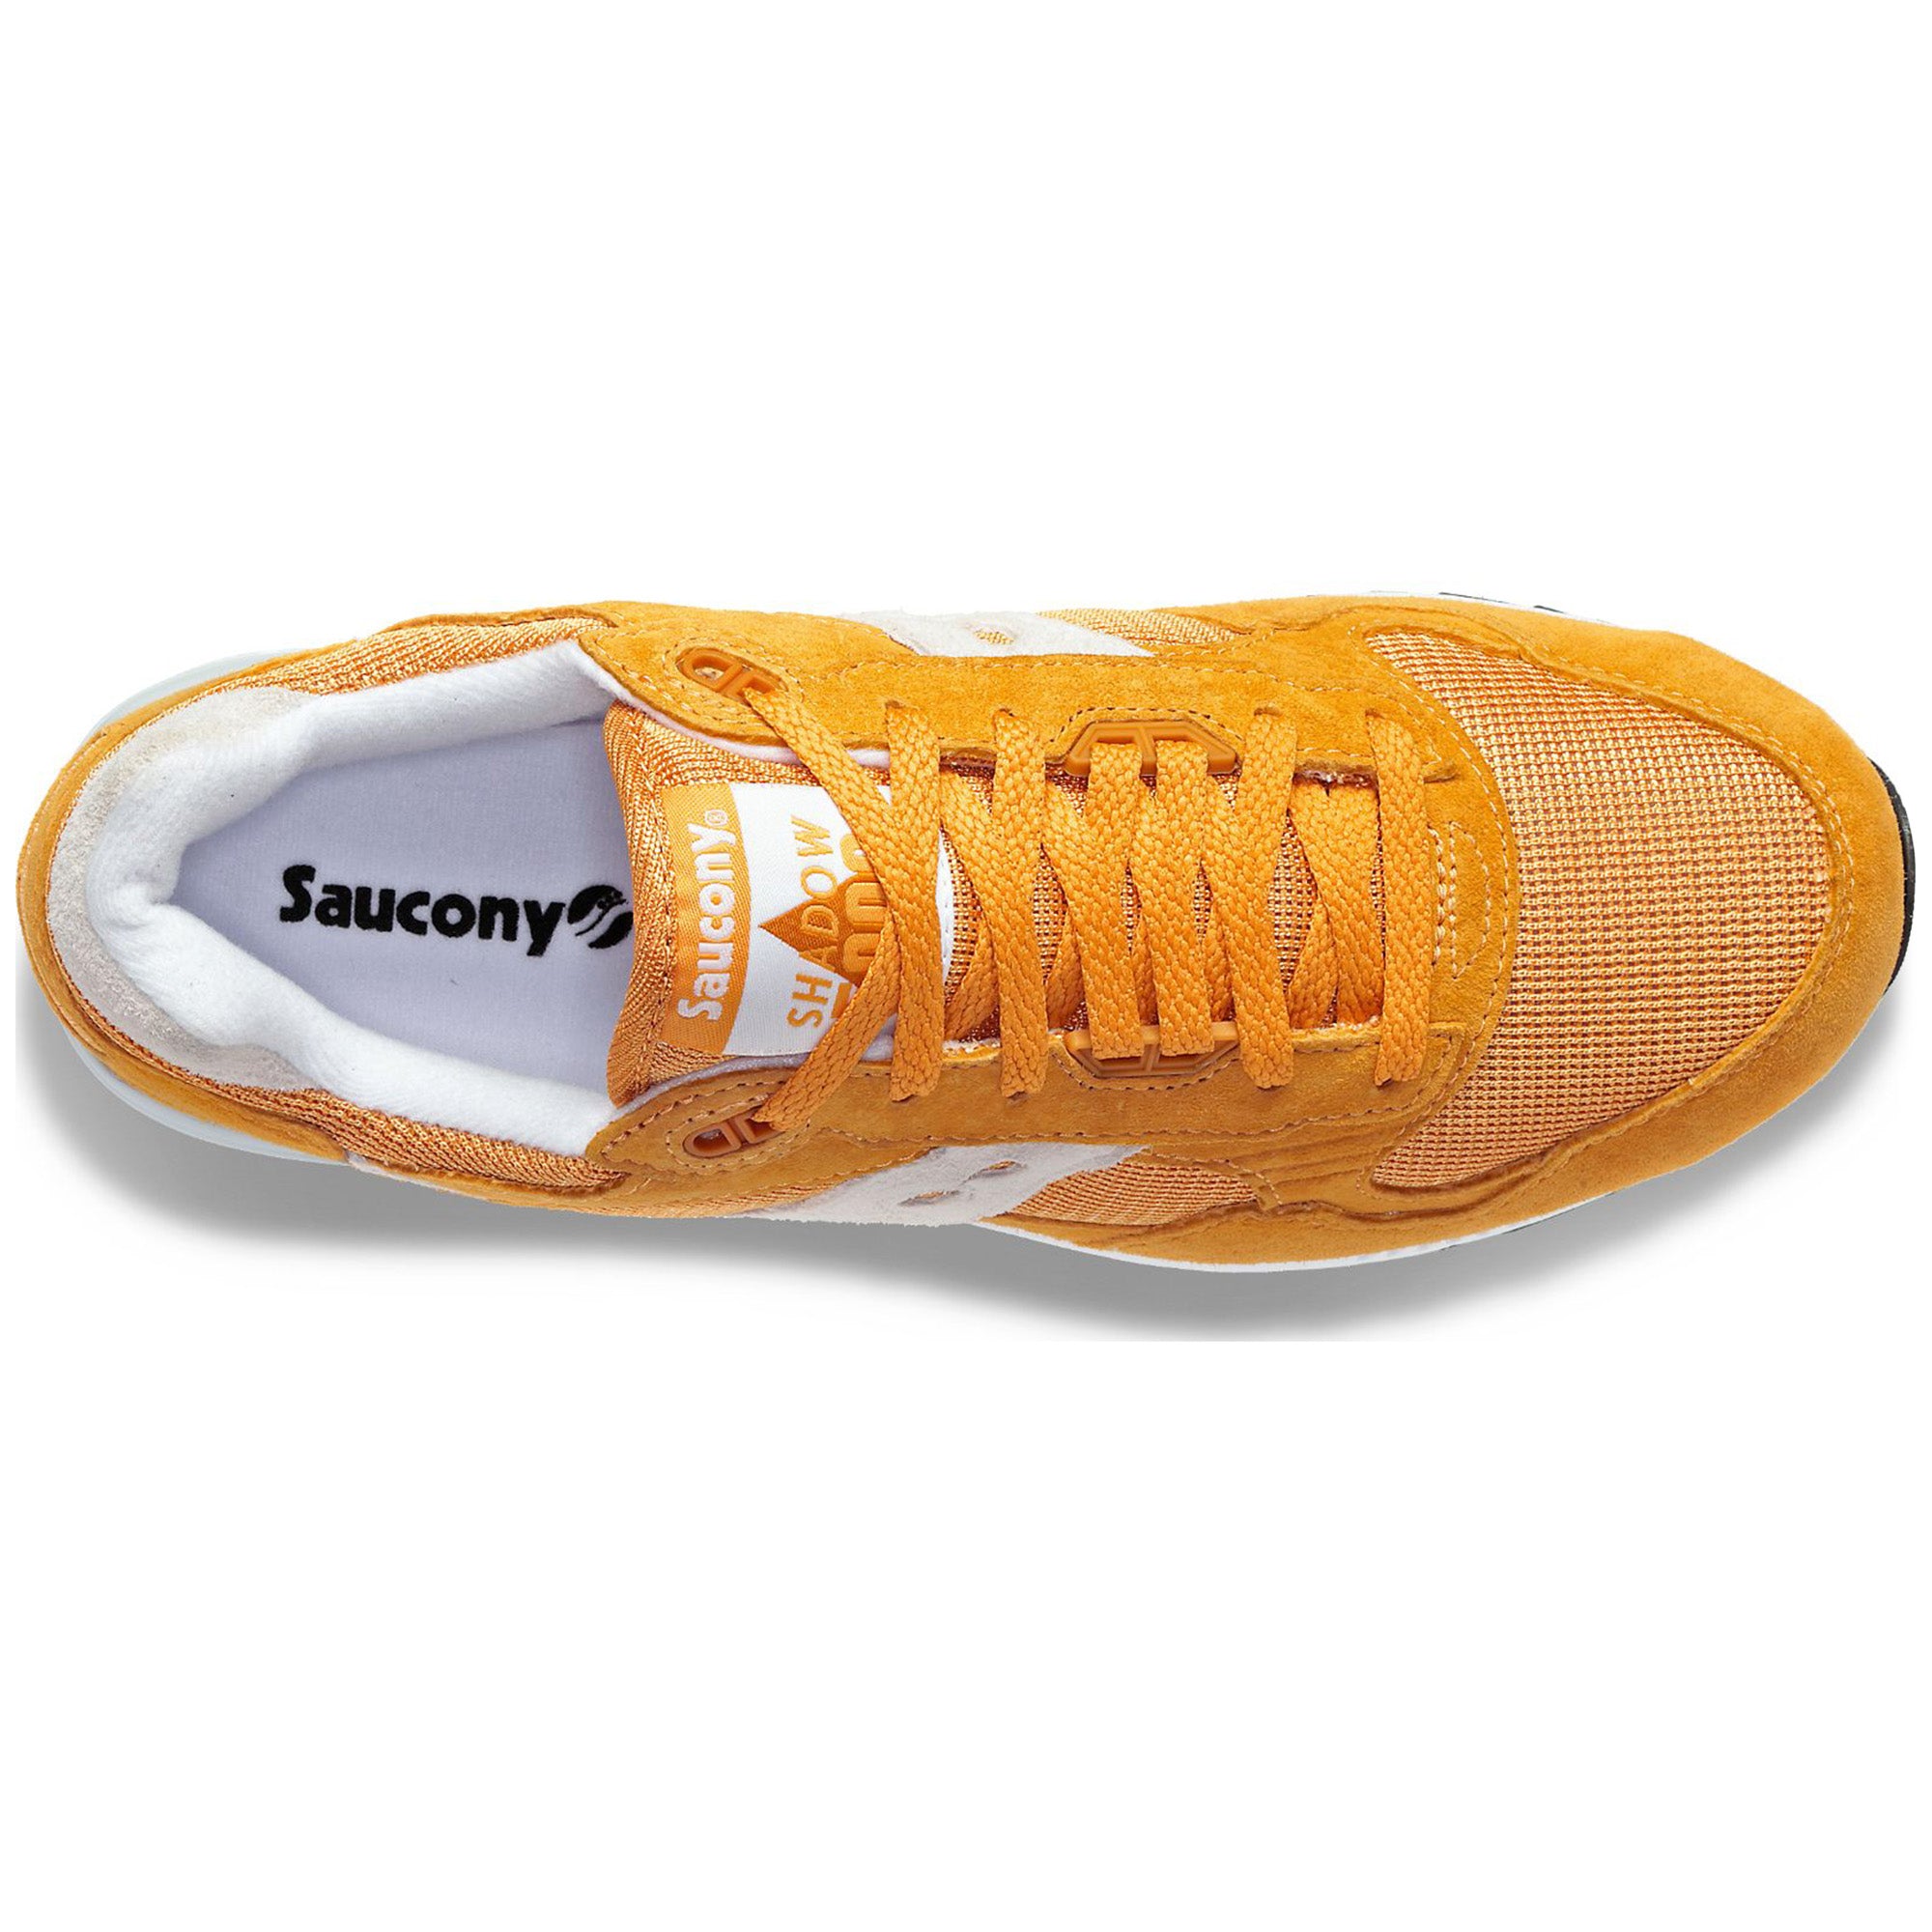 Saucony Shadow 5000 Trainers - Mustard